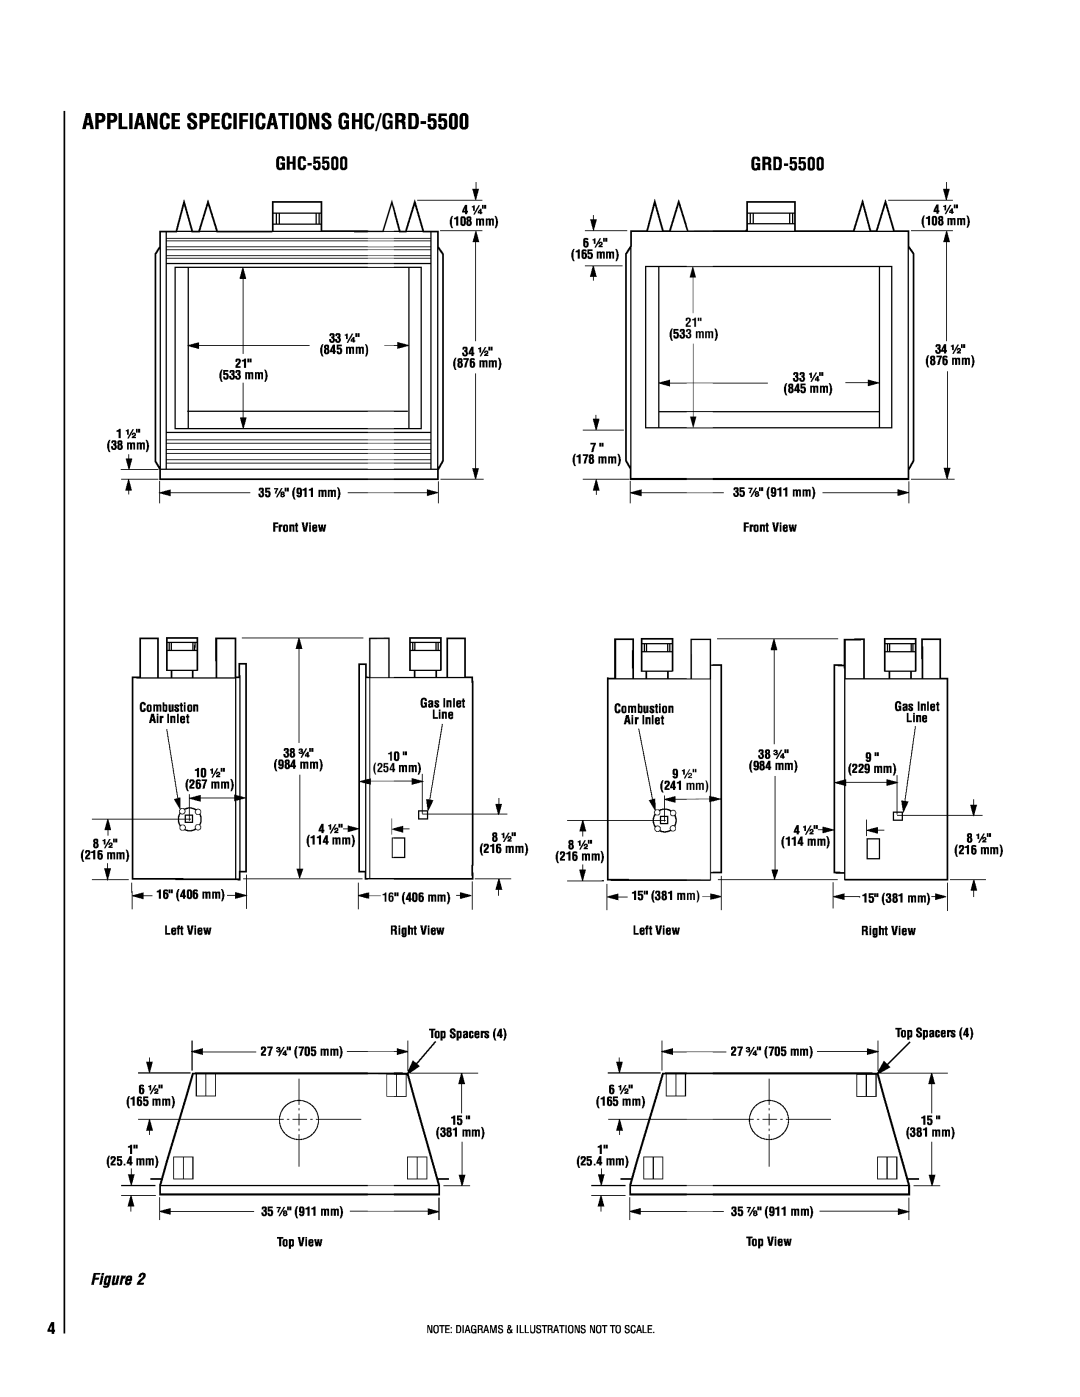 Superior installation instructions APPLIANCE SPECIFICATIONS GHC/GRD-5500, GHC-5500 